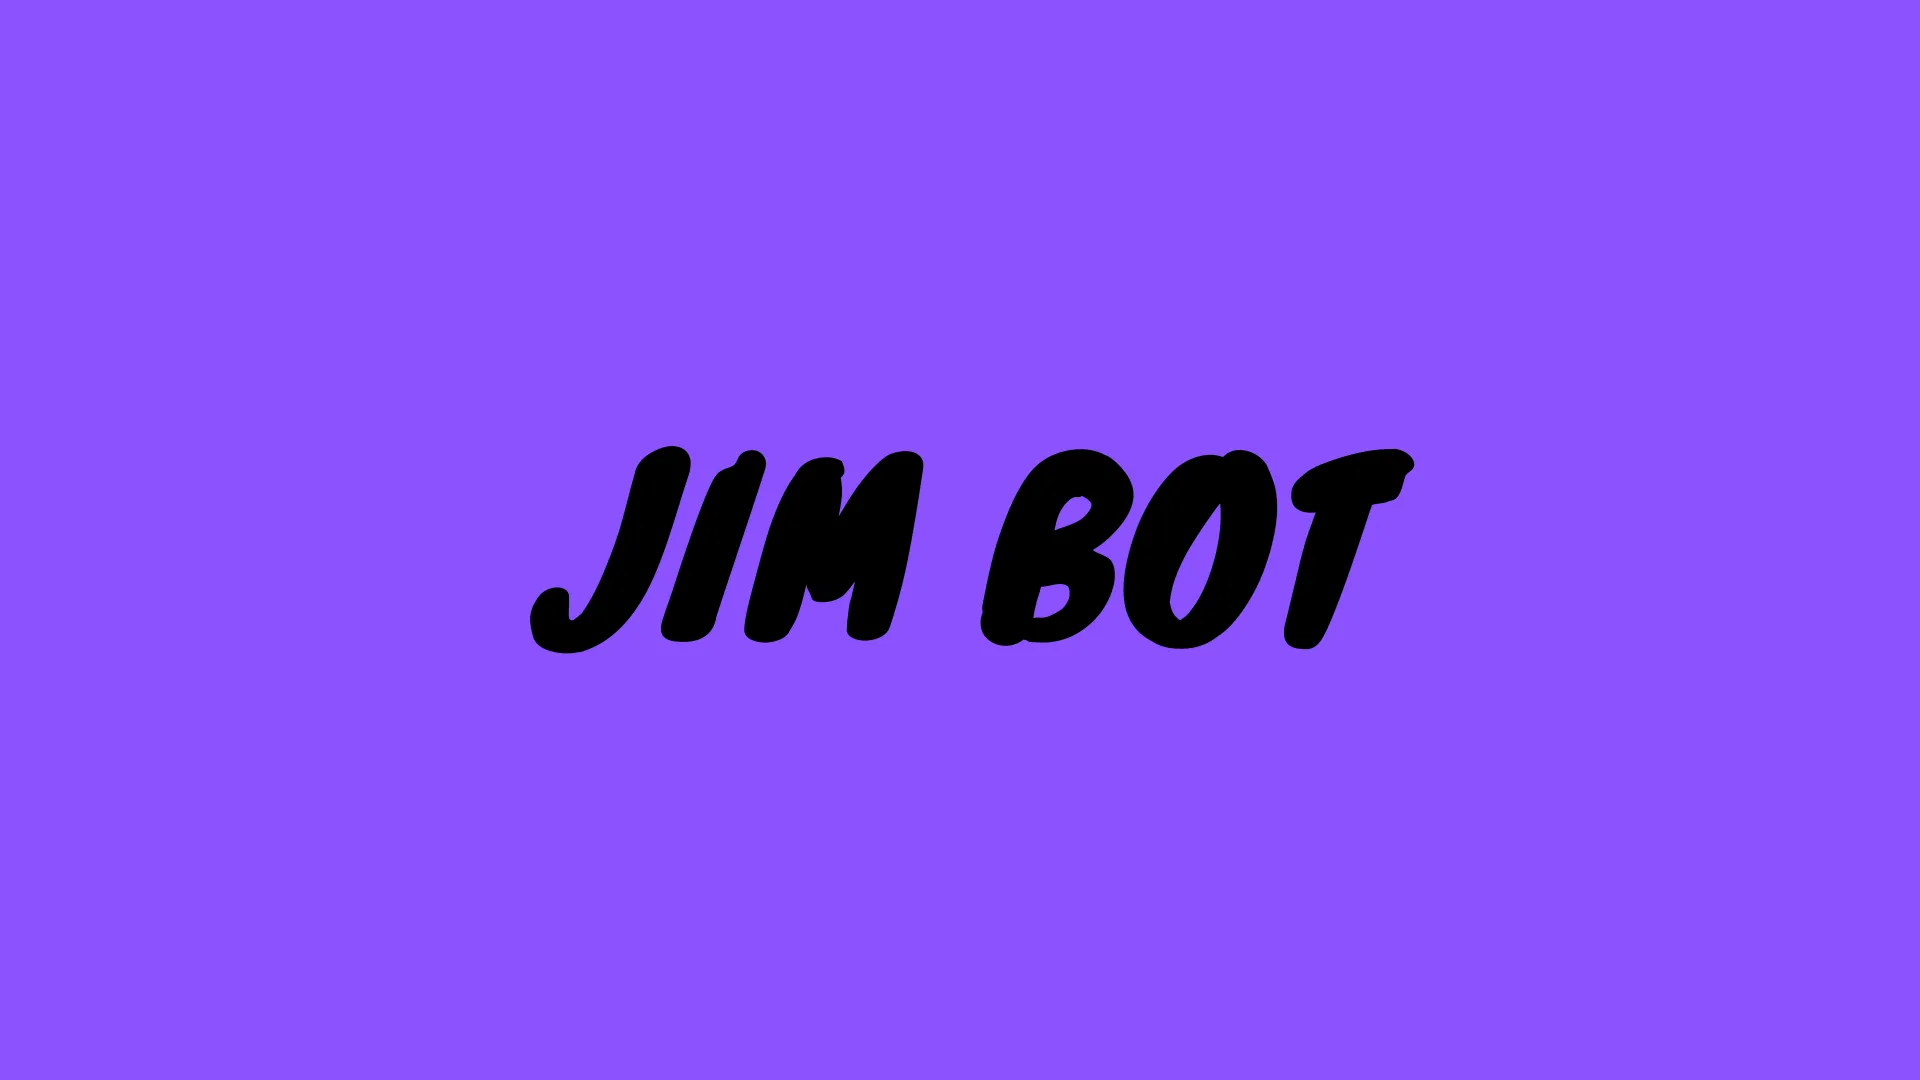 A picture with a Purlple background with black font spelling out &ldquo;Jim Bot&rdquo;